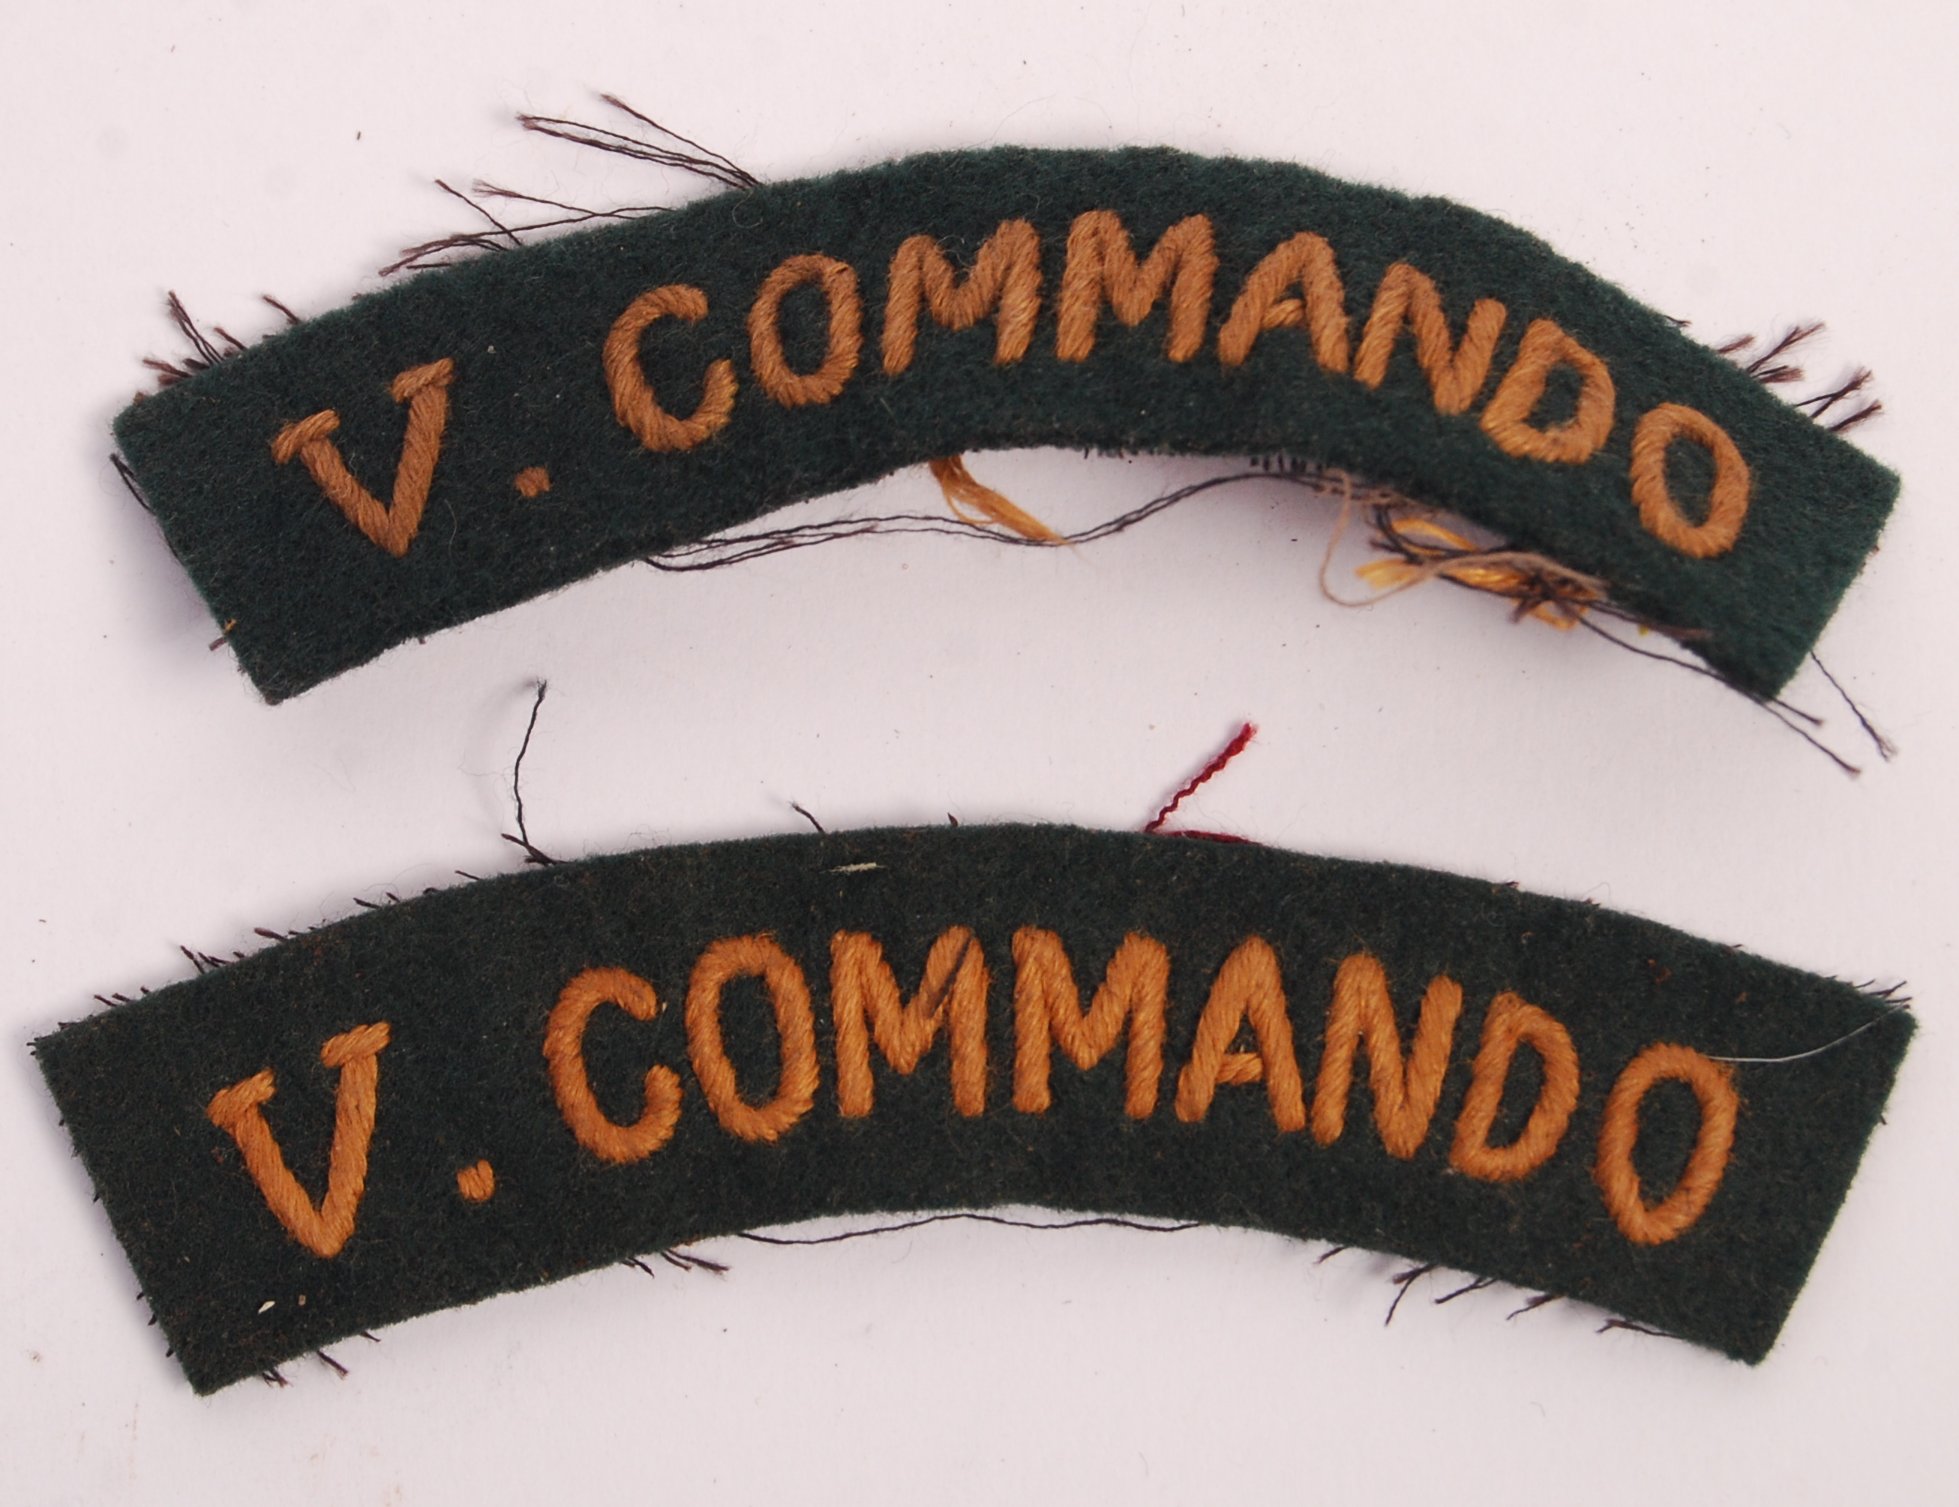 COLLECTION OF WWII SECOND WORLD WAR COMMANDO RELAT - Image 5 of 7